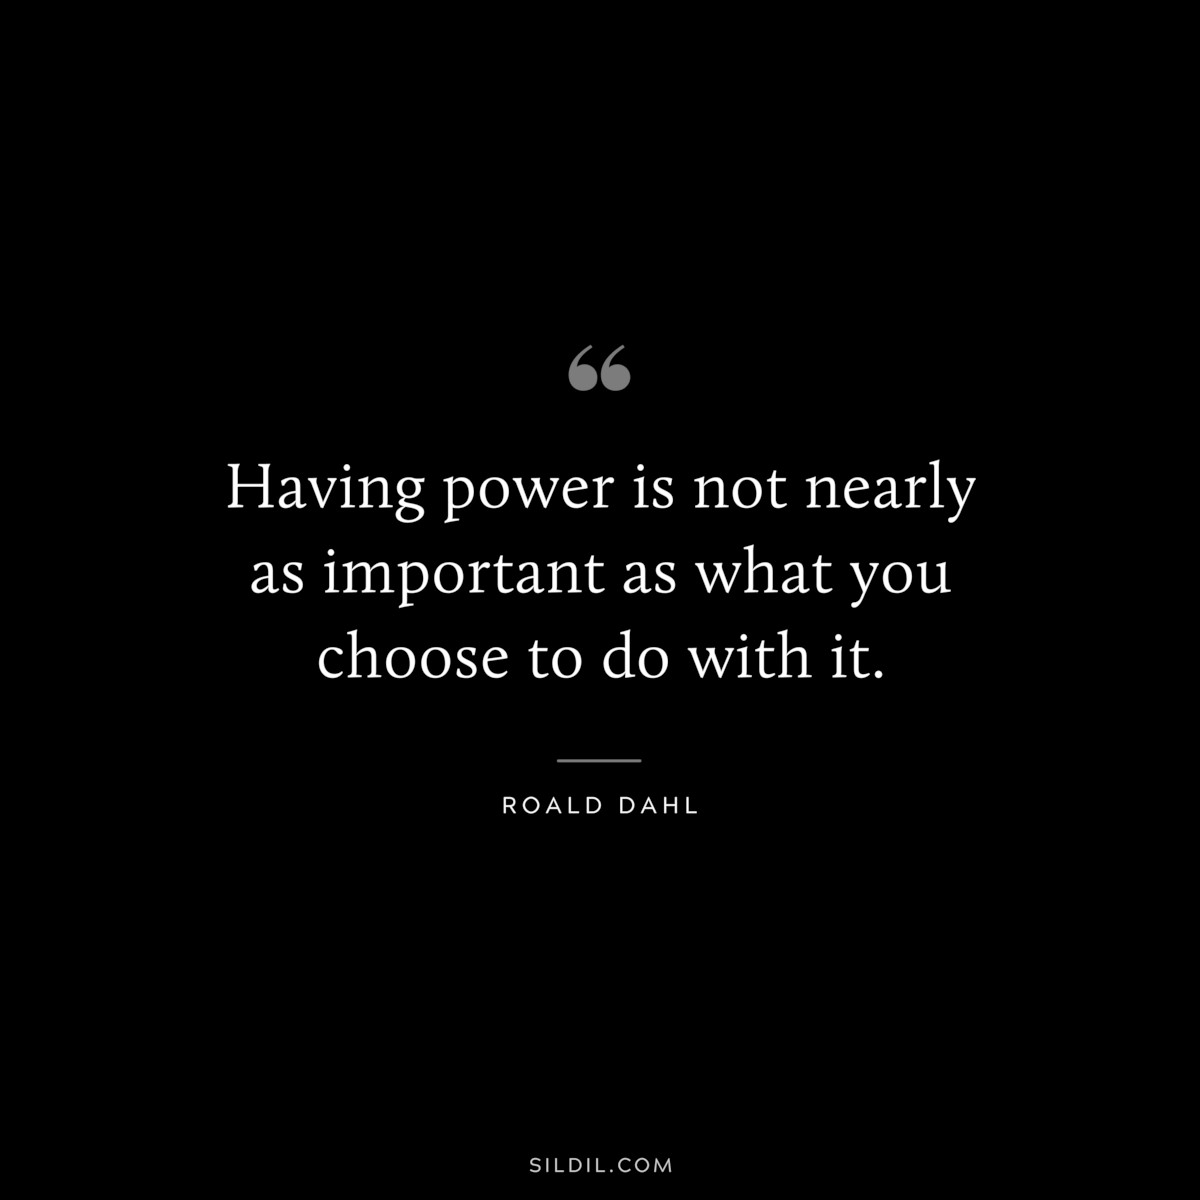 Having power is not nearly as important as what you choose to do with it. ― Roald Dahl